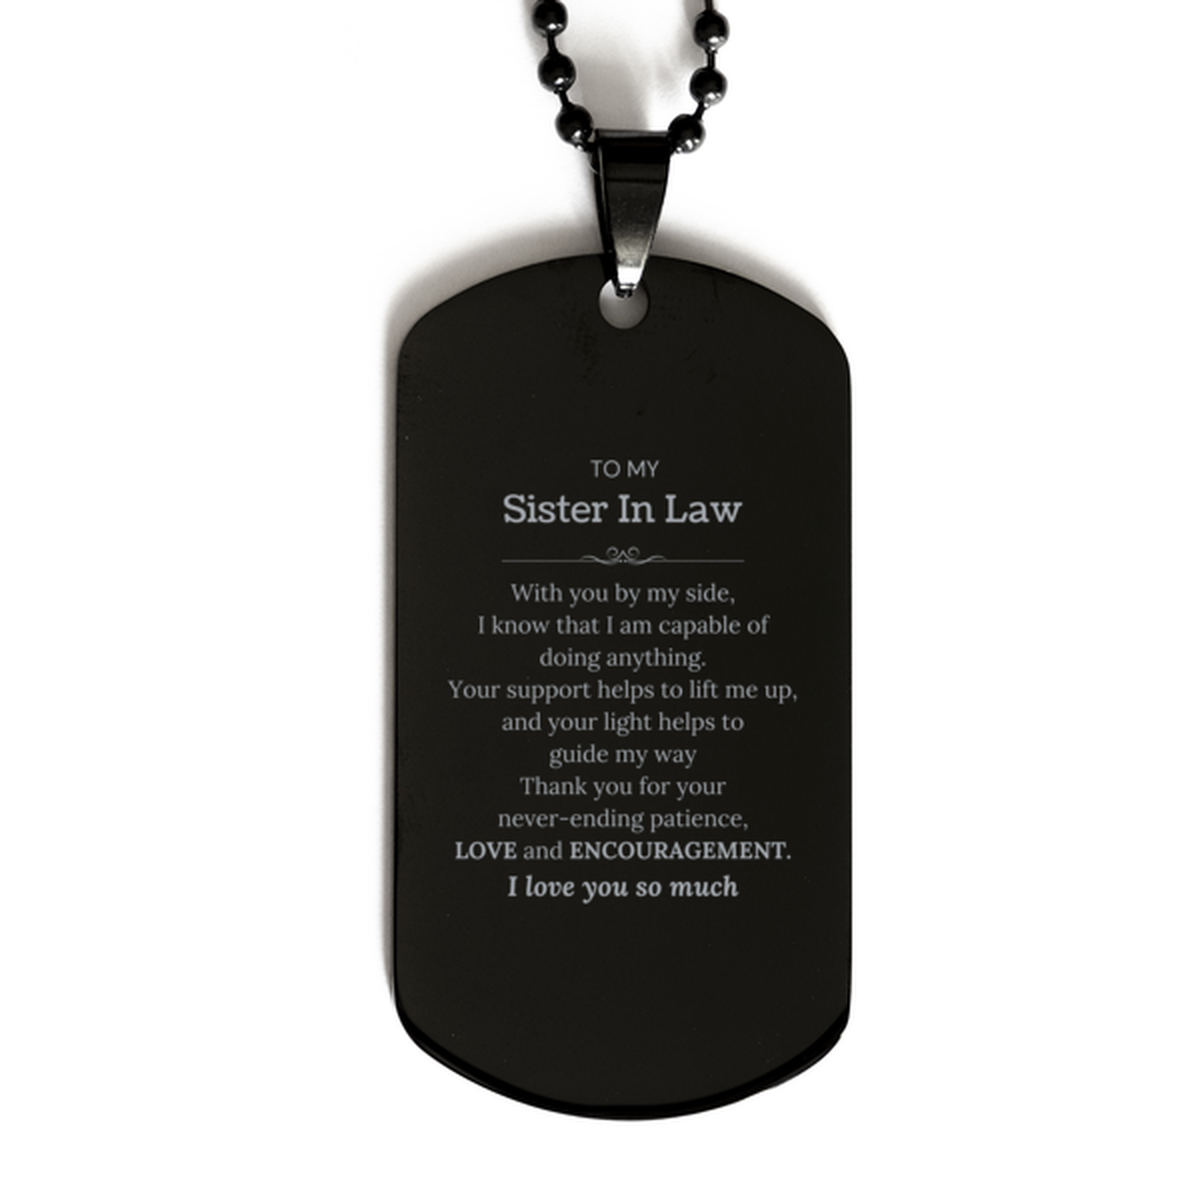 Appreciation Sister In Law Black Dog Tag Gifts, To My Sister In Law Birthday Christmas Wedding Keepsake Gifts for Sister In Law With you by my side, I know that I am capable of doing anything. I love you so much